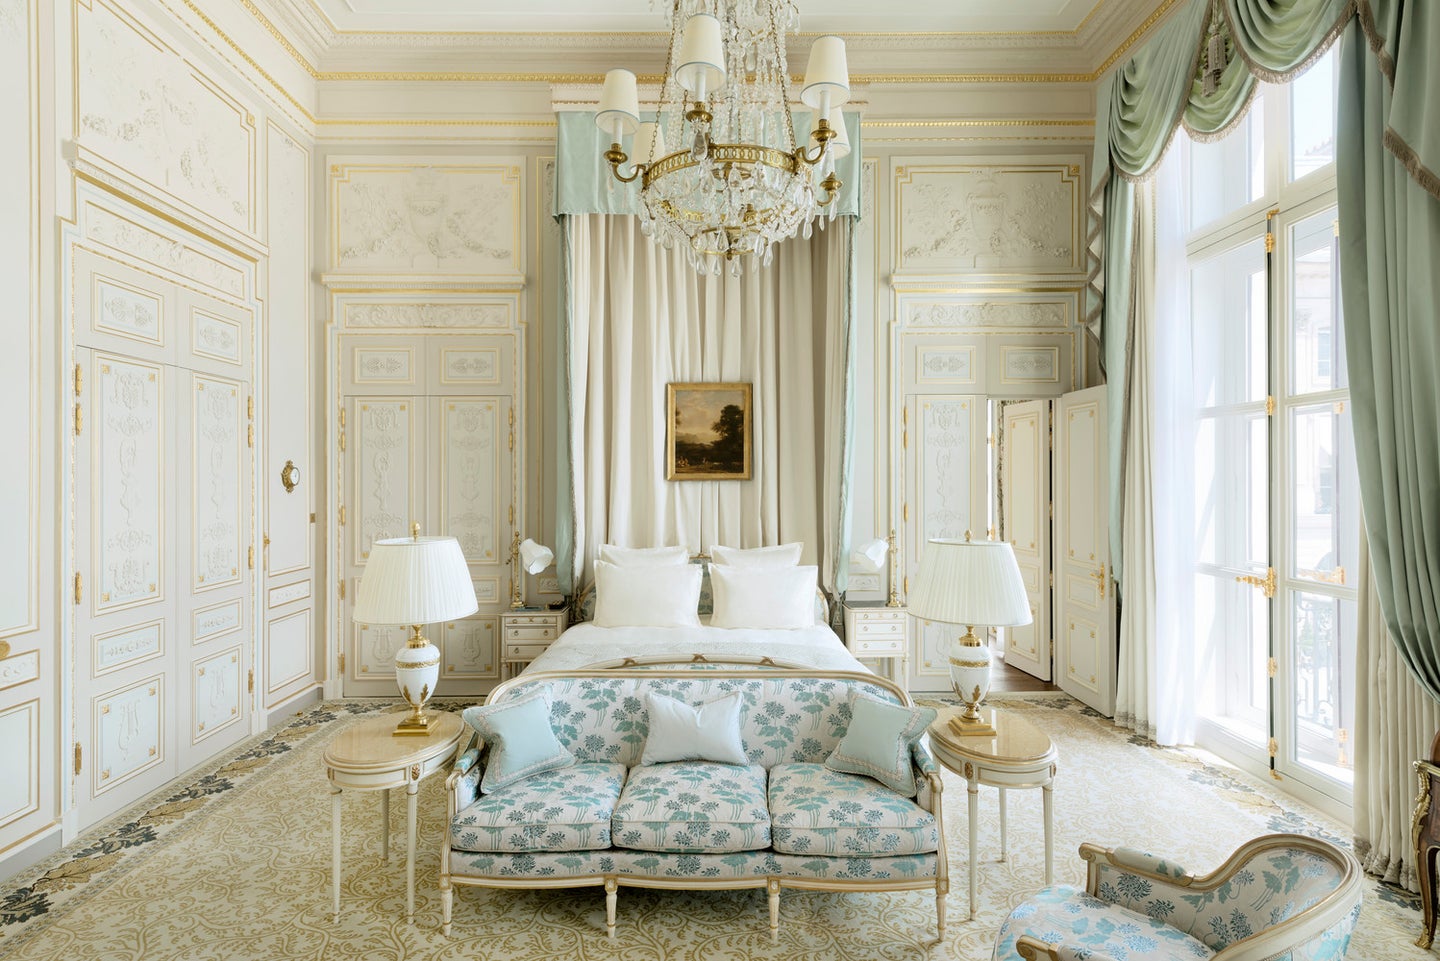 Inside Hôtel Ritz Paris and the Wallpaper Designs That Inspired Us